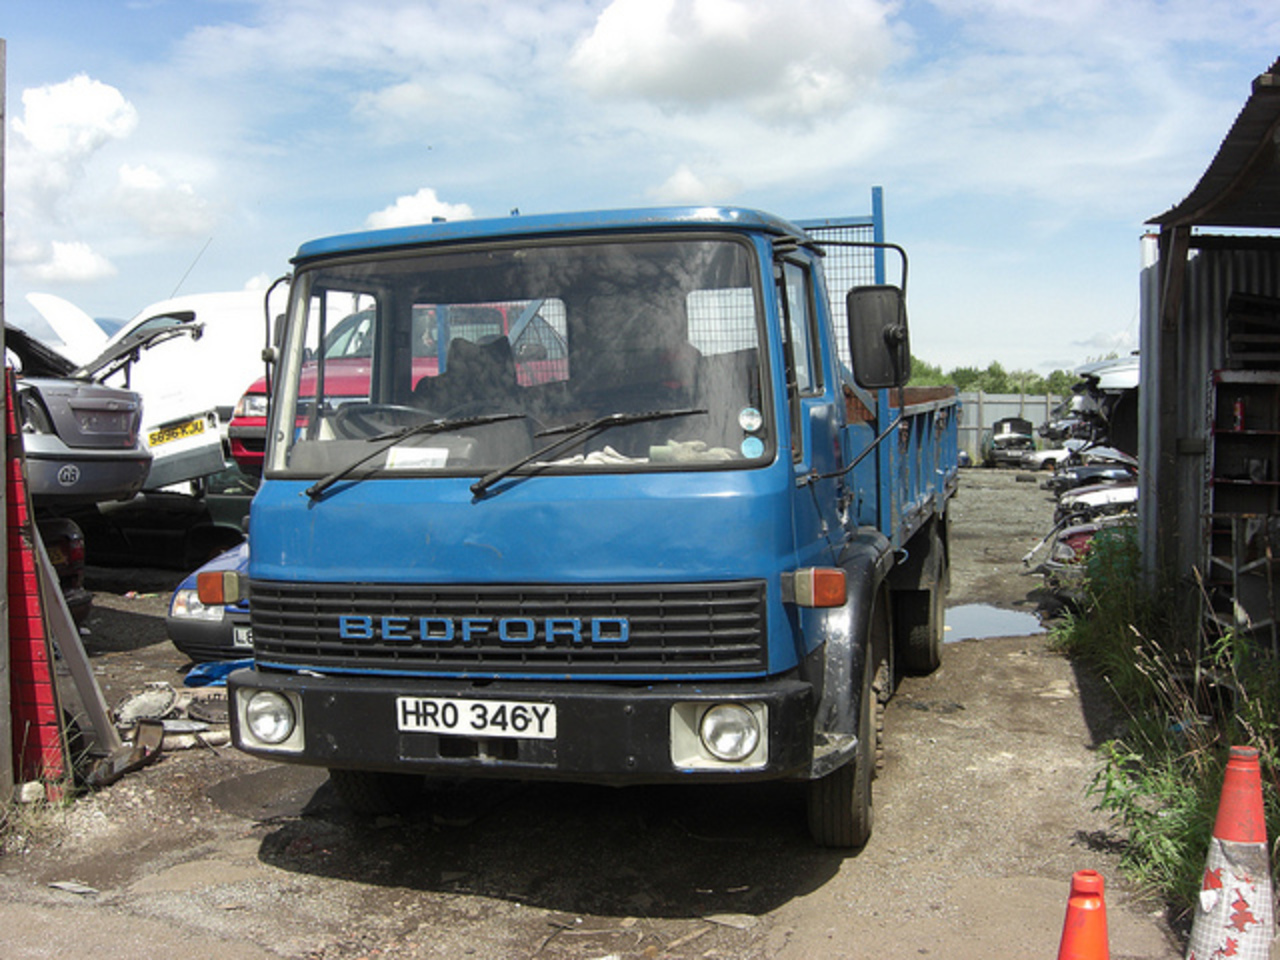 The Bedford TL Truck | Flickr - Photo Sharing!